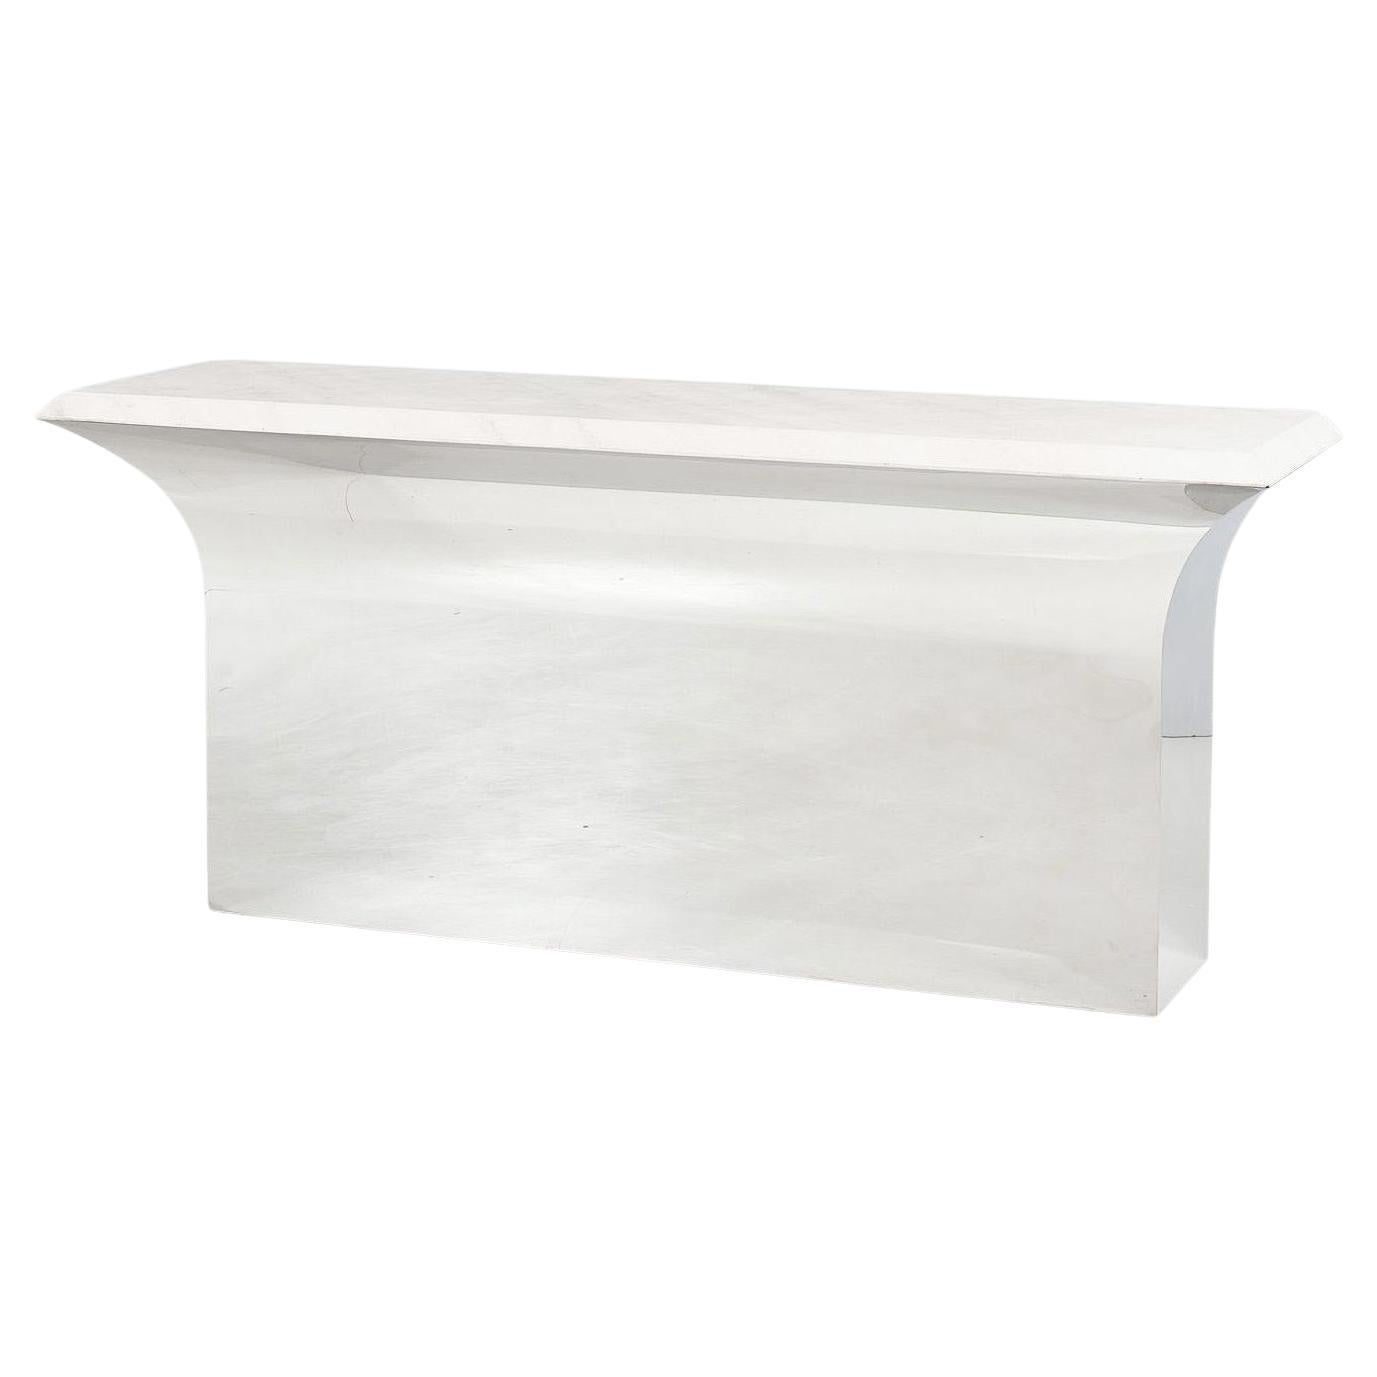 Sally Sirkin Lewis Sculptural Stainless Steel and Limestone Console